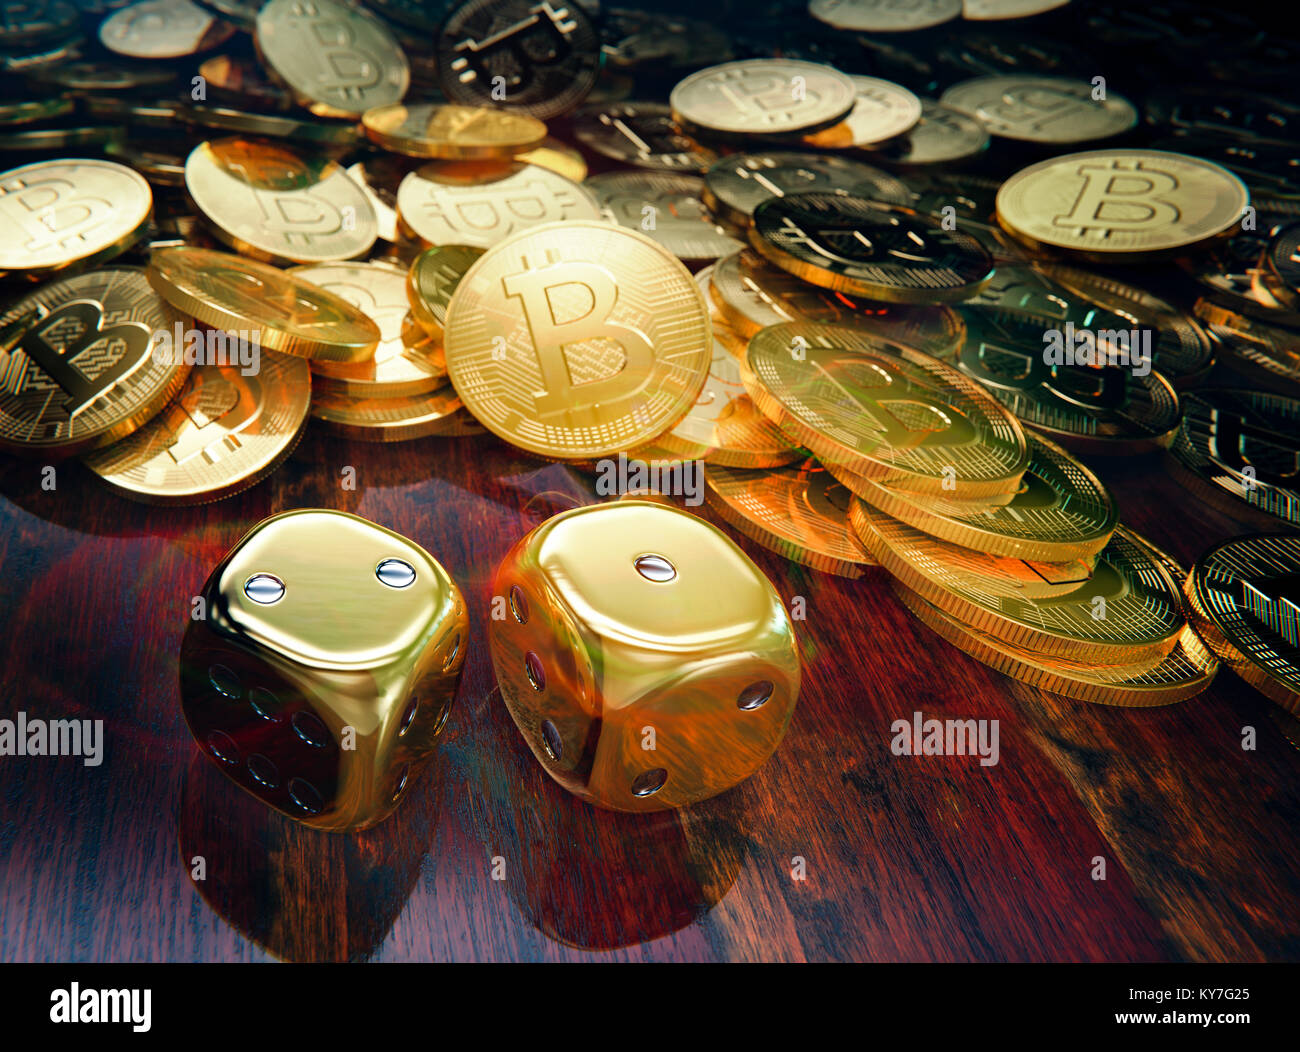 Bitcoin dice gambling, stack of  coins and golden dice Stock Photo